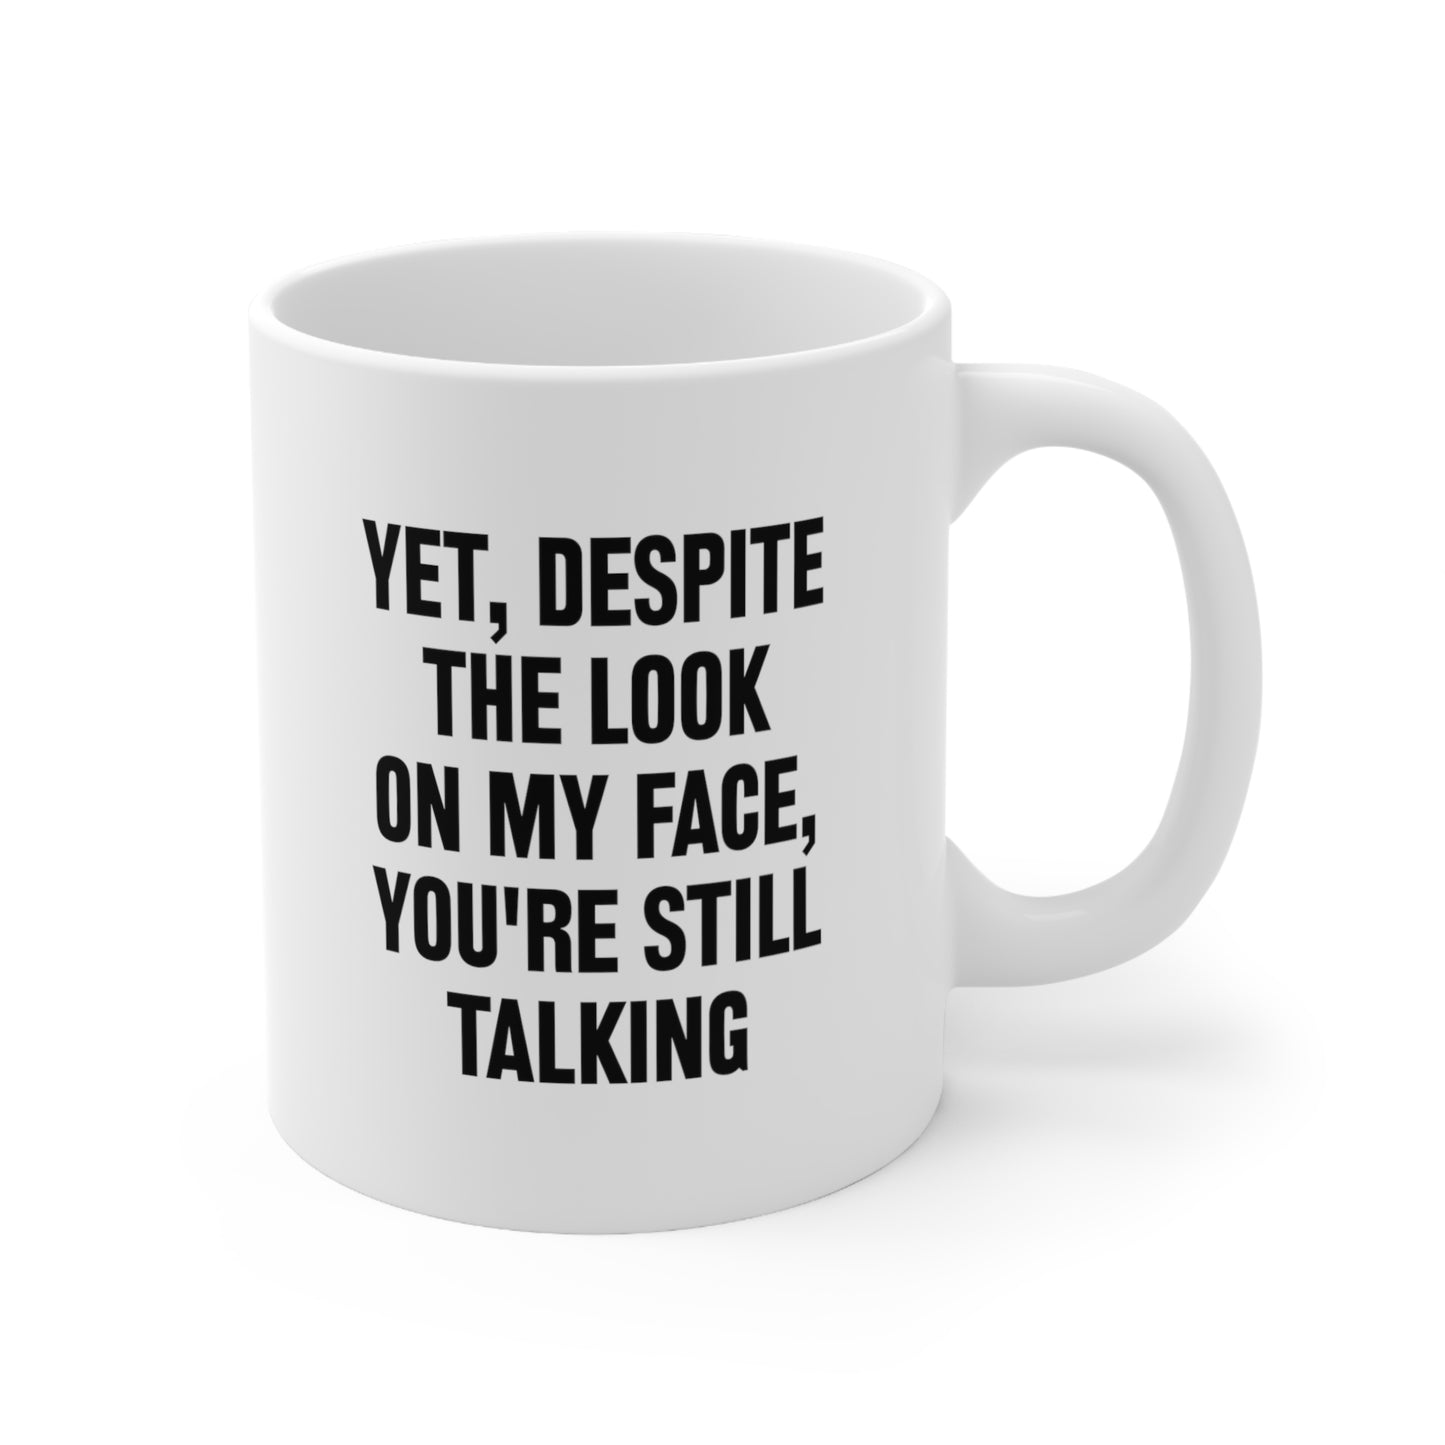 Yet despite the look on my face you're still talking Coffee Mug 11oz